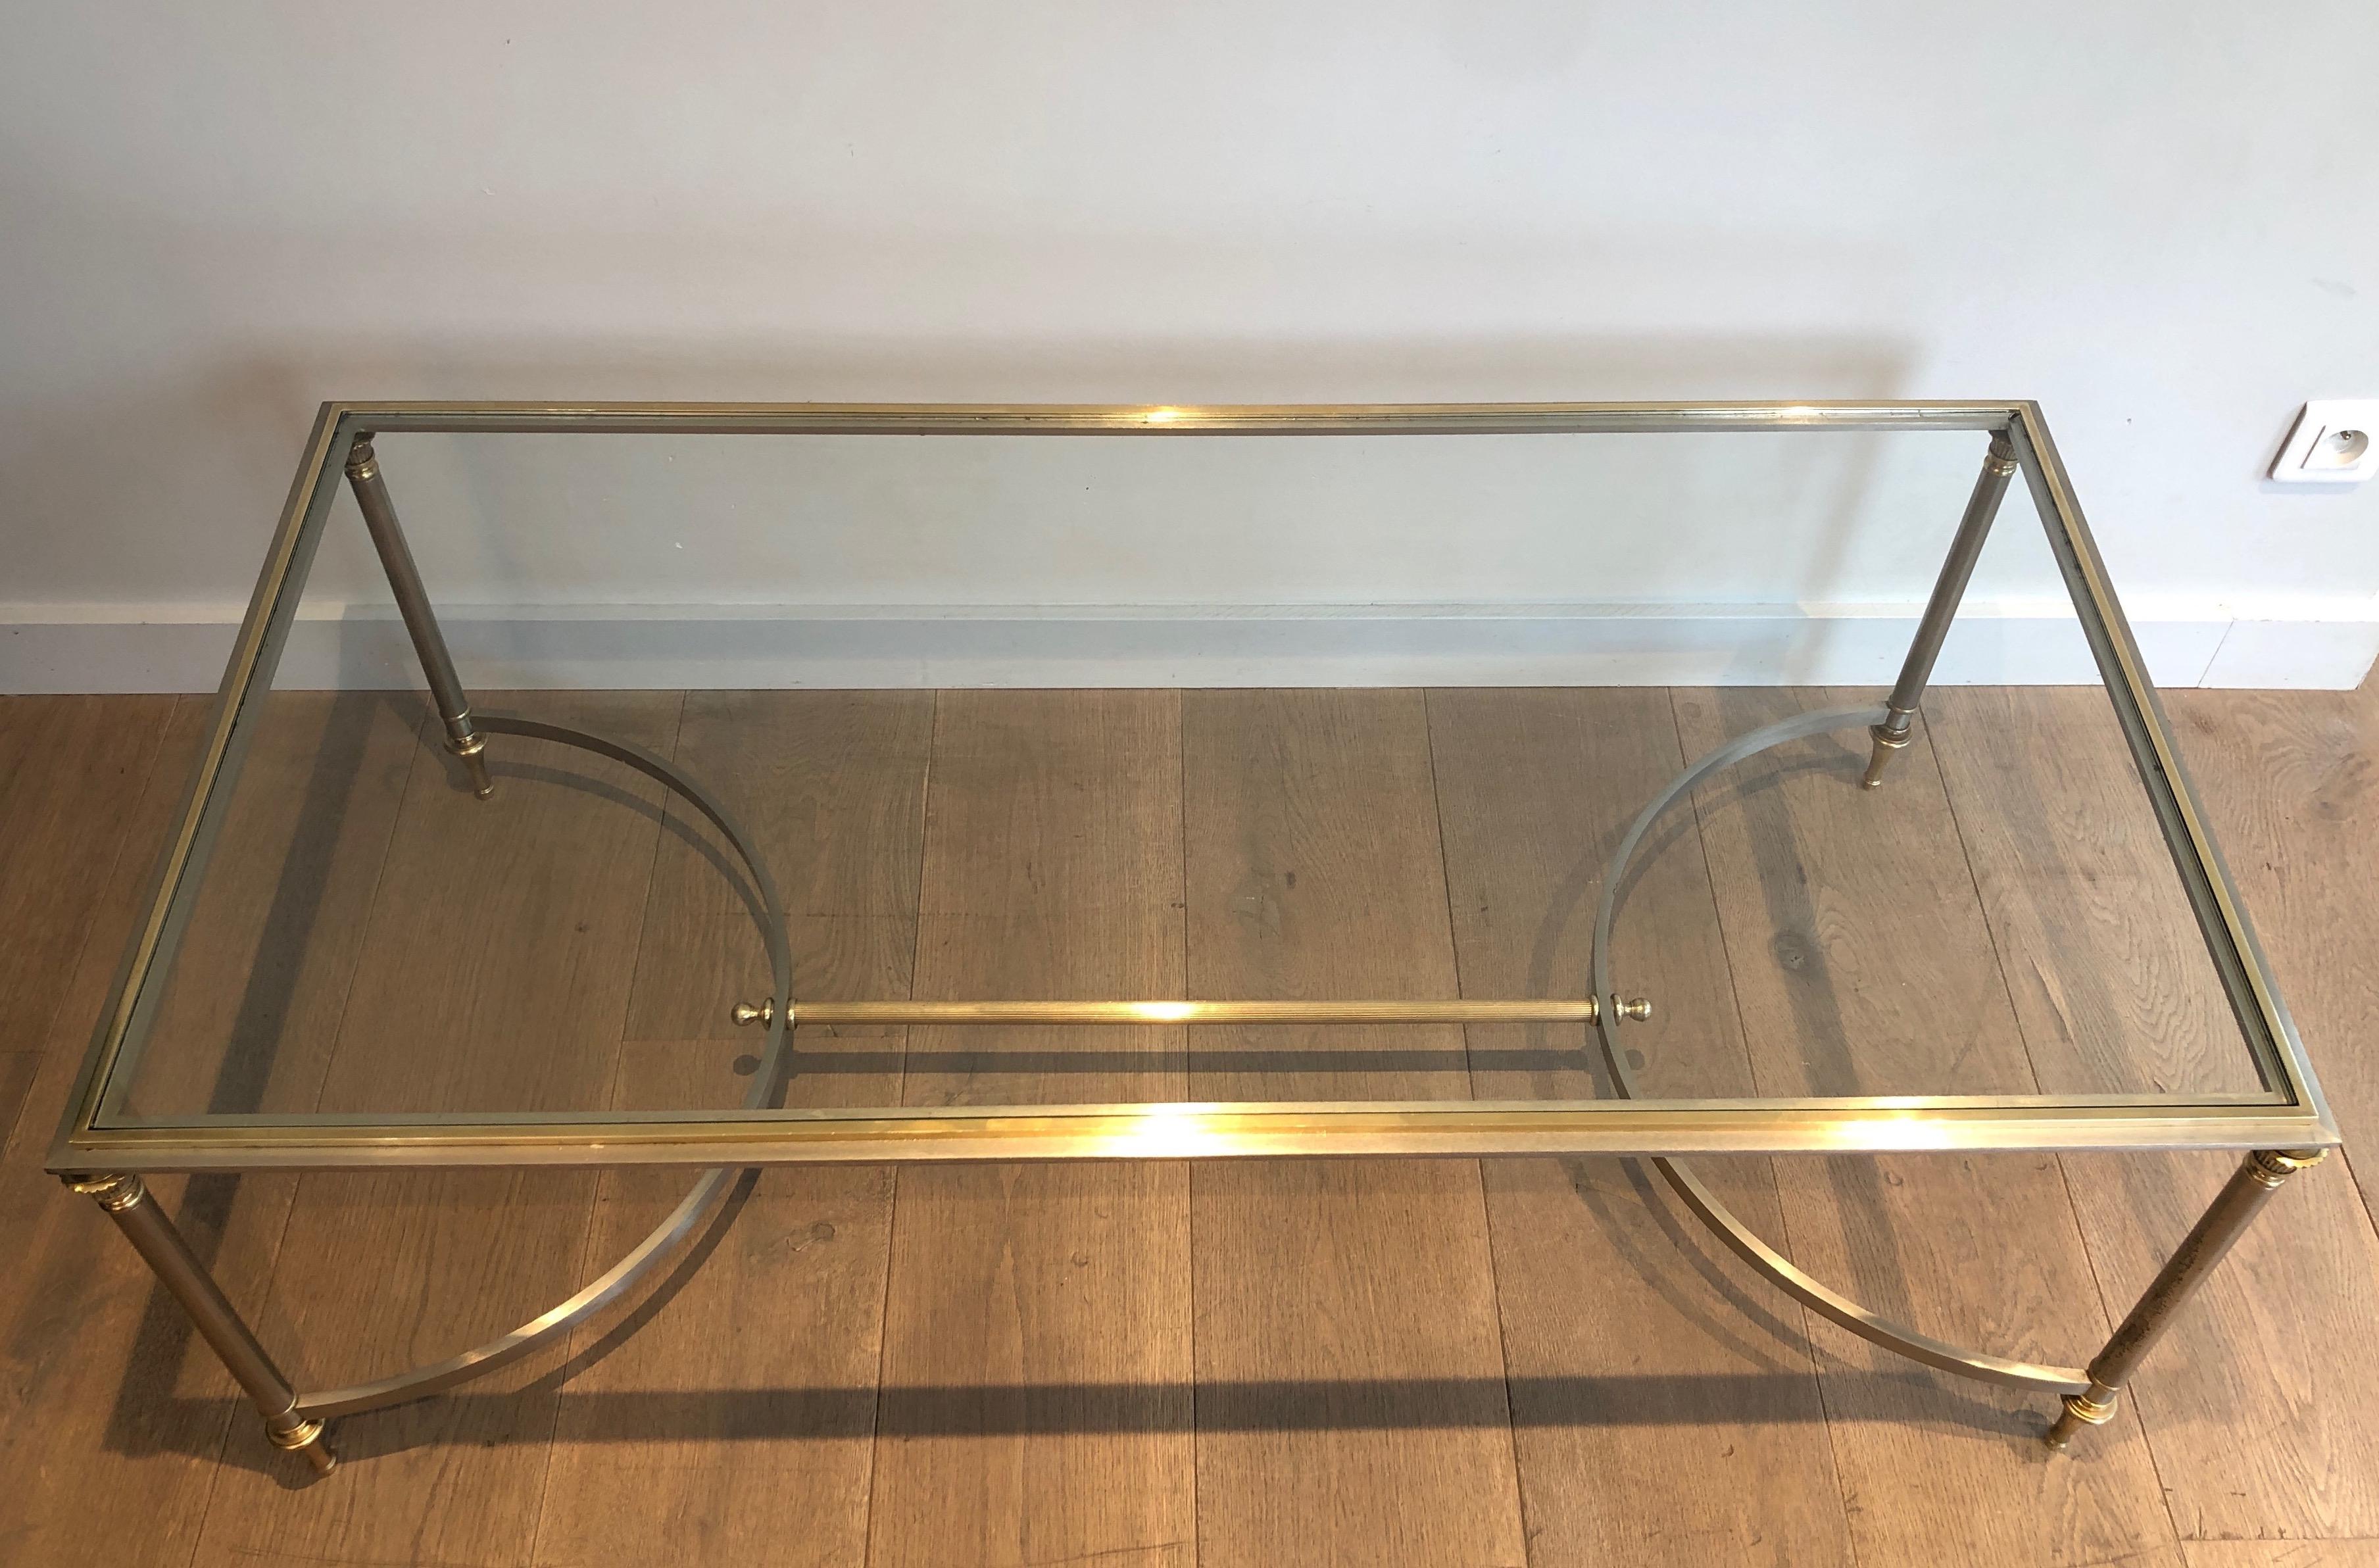 Neoclassical Brushed Steel and Brass Coffee Table. French Work by Maison Jansen, circa 1940